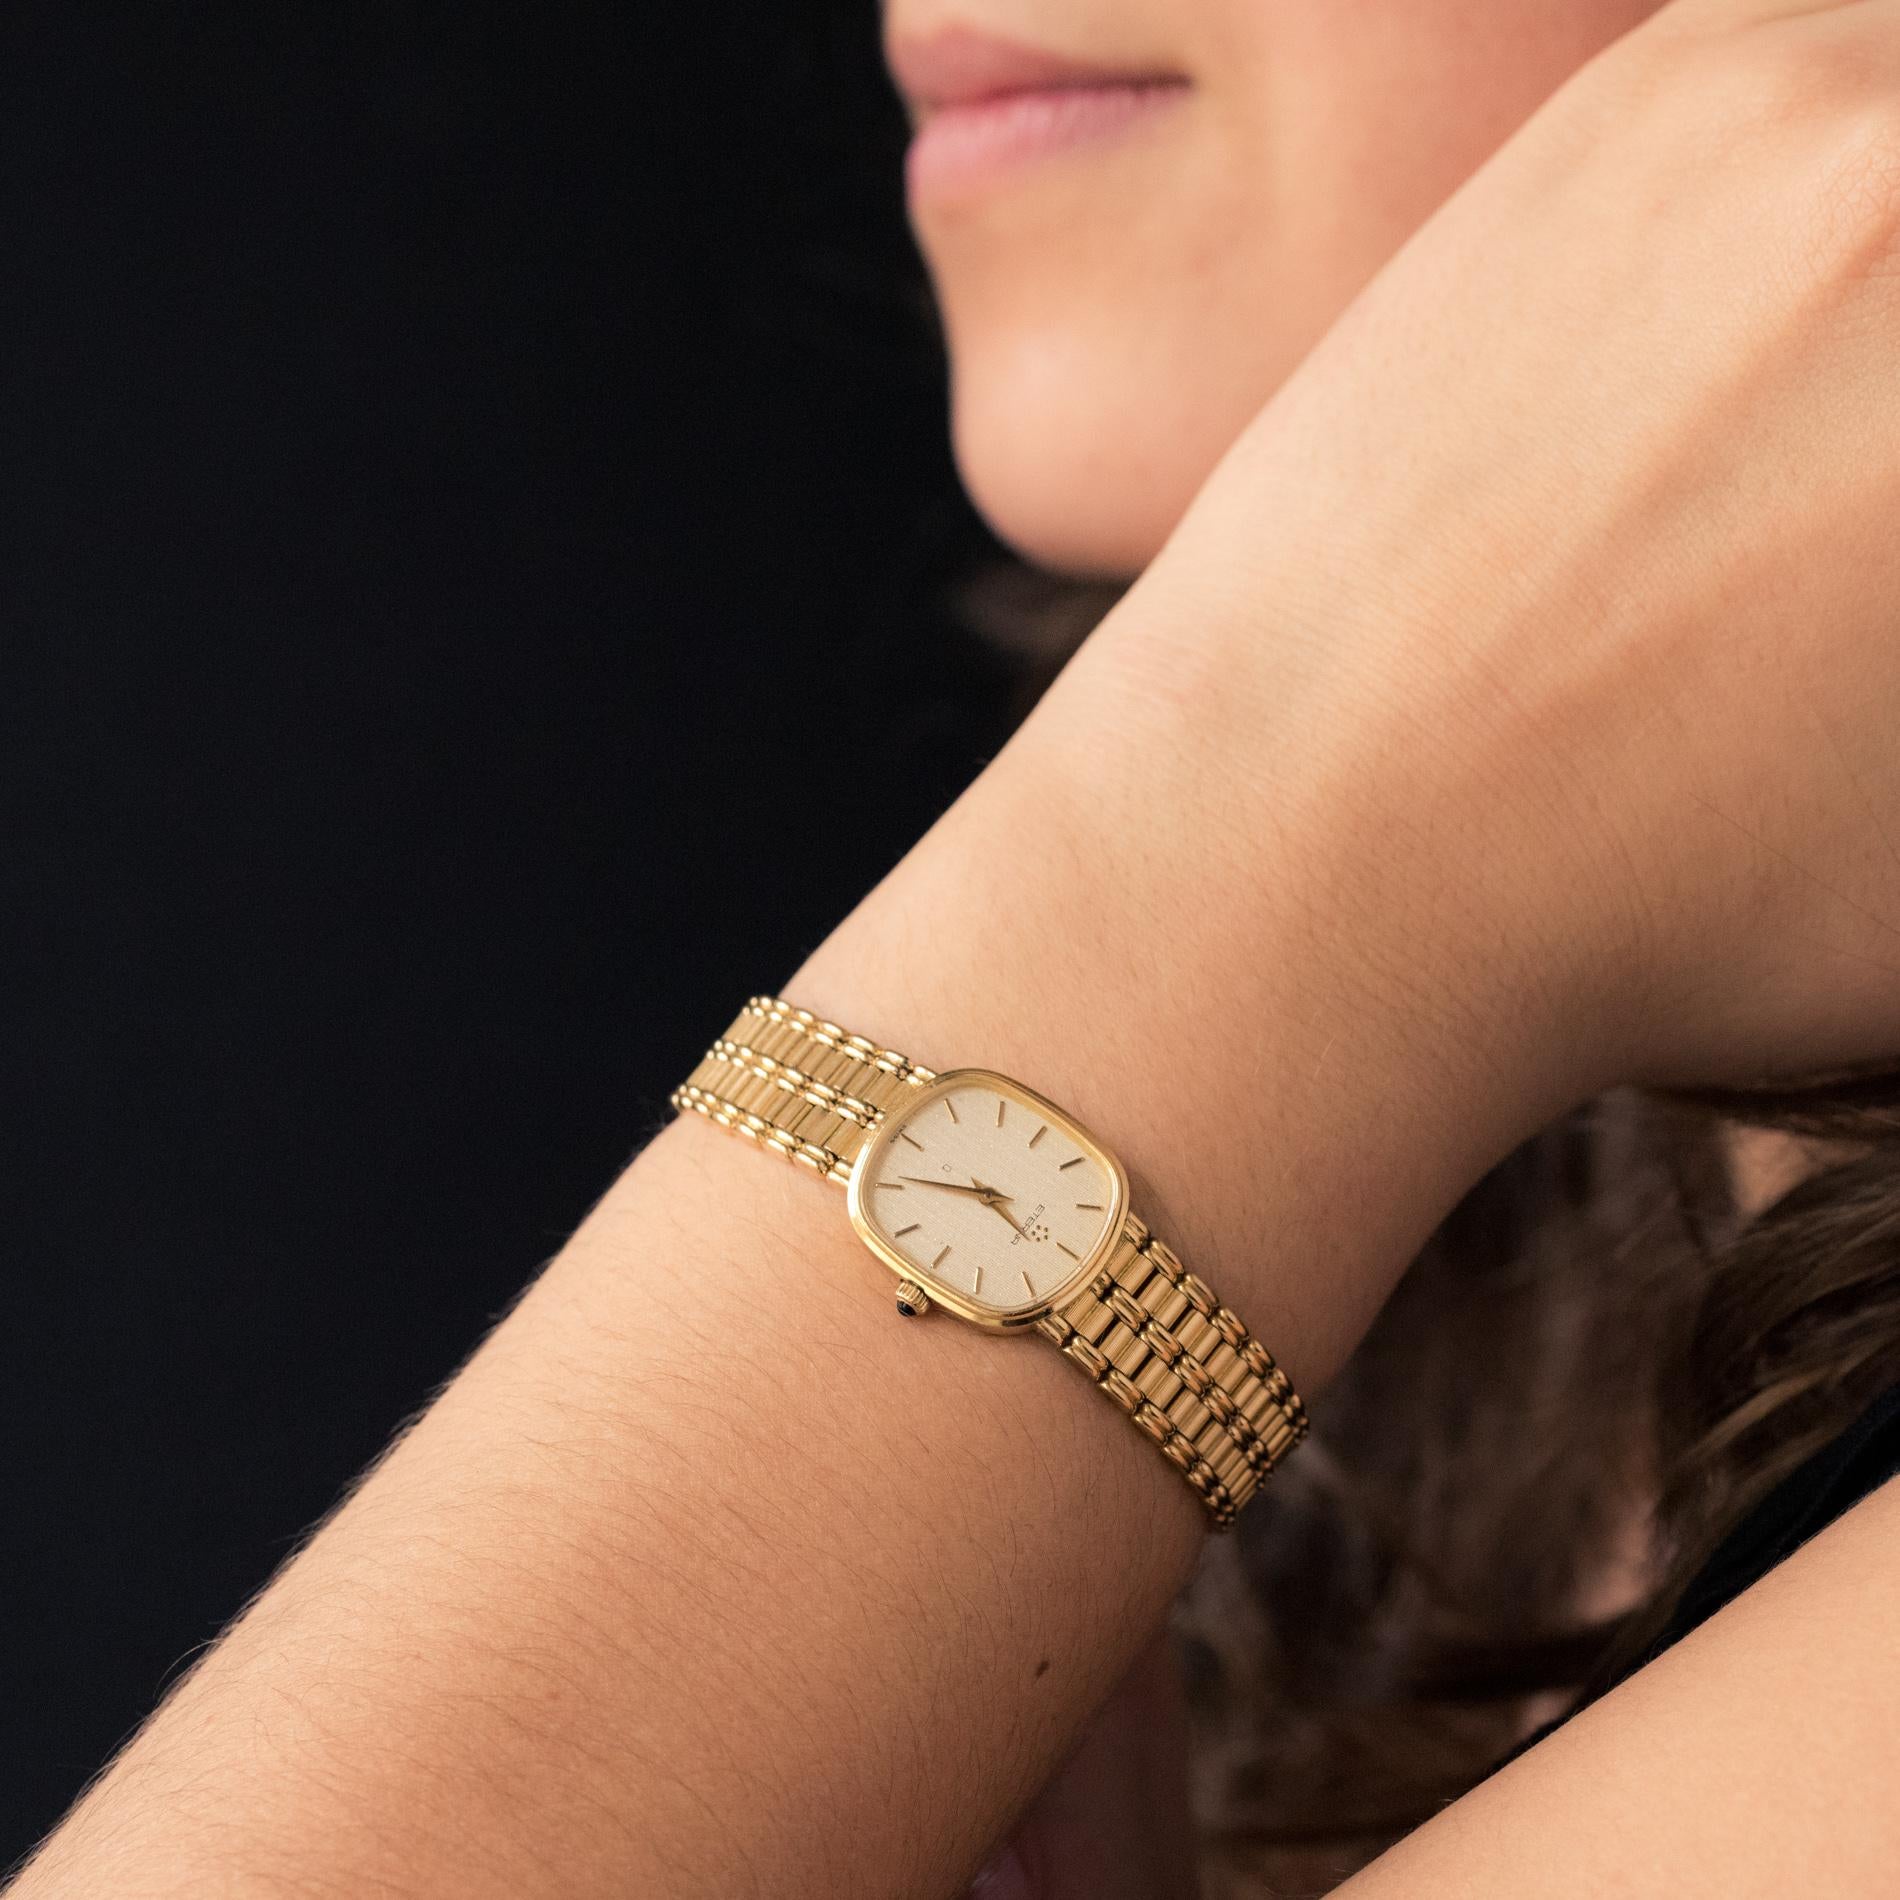 Lady's wristwatch in 18 karat yellow gold, owl and weevil hallmarks.
It is rectangular in shape with slightly rounded angles. The glittery dial has stick figures.
The bracelet is basket woven. Ladder clasp with security.
Quartz movement. Eterna